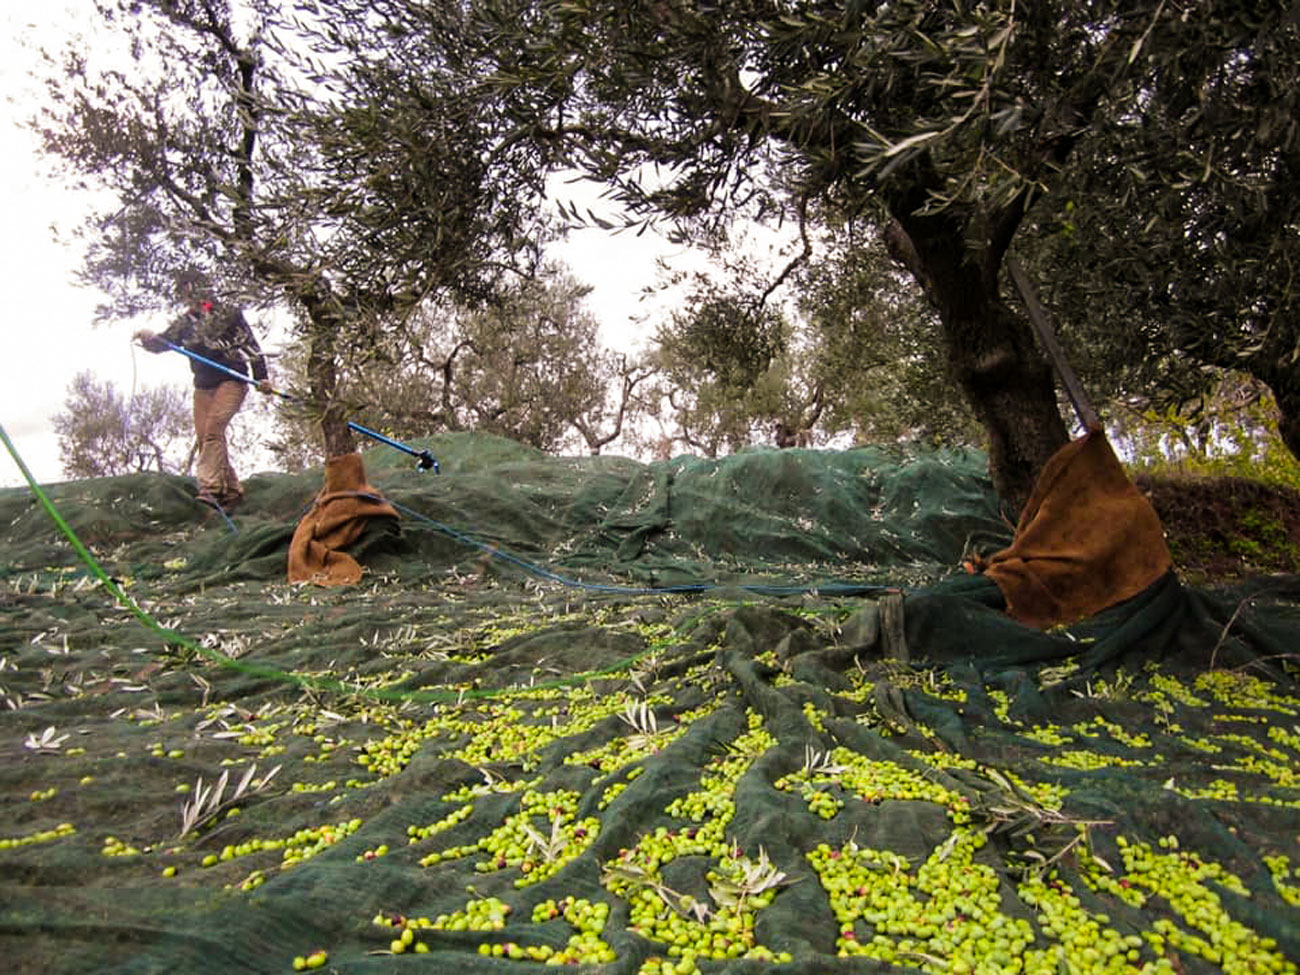 Large nets filled with olives.